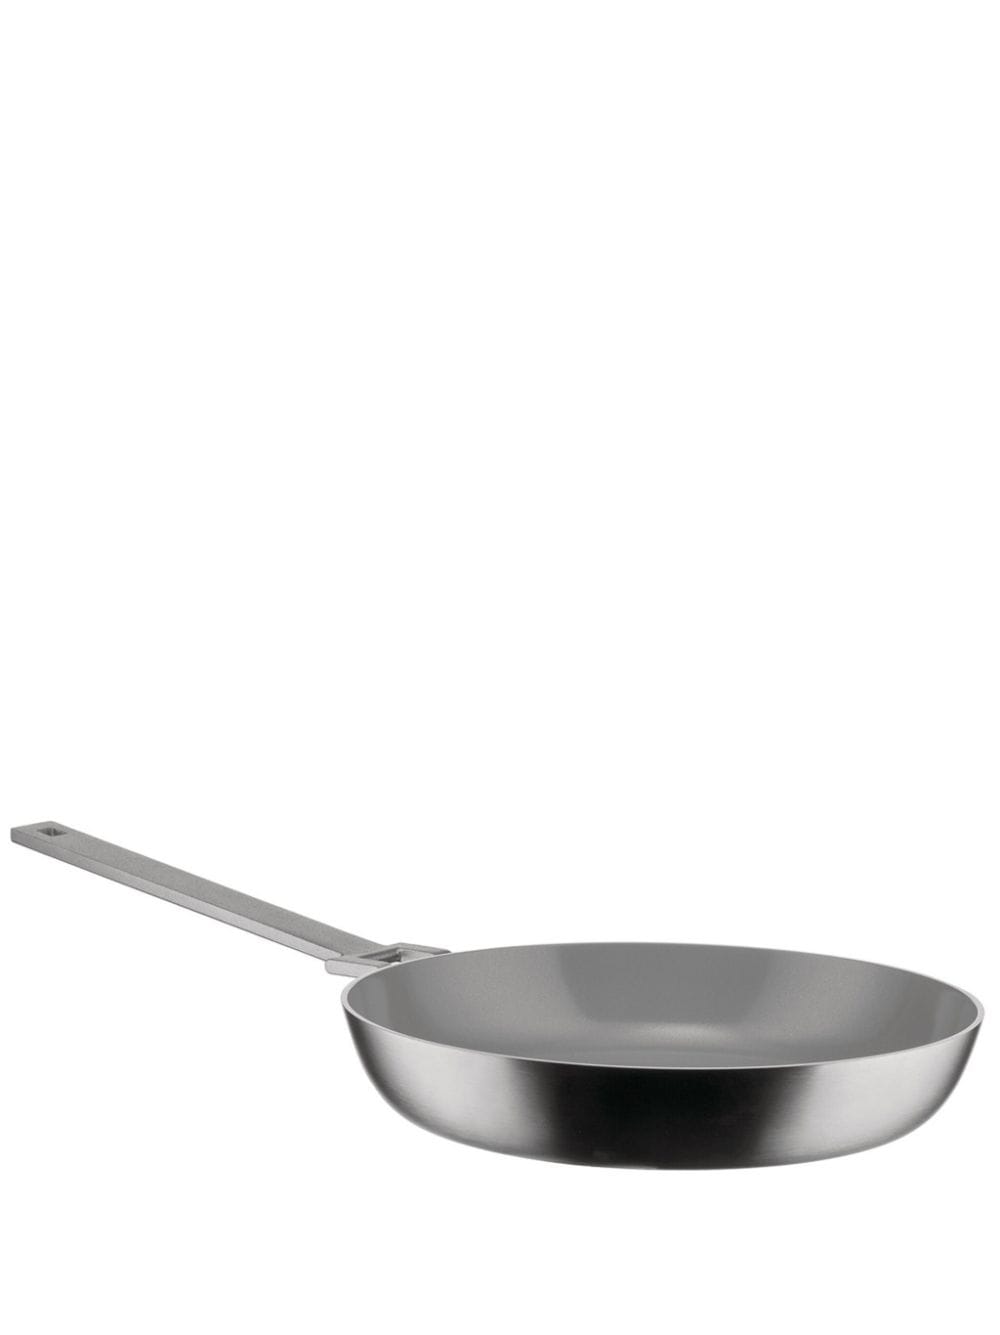 Alessi La Cintura Di Orione Stainless Steel Frying Pan In Silver